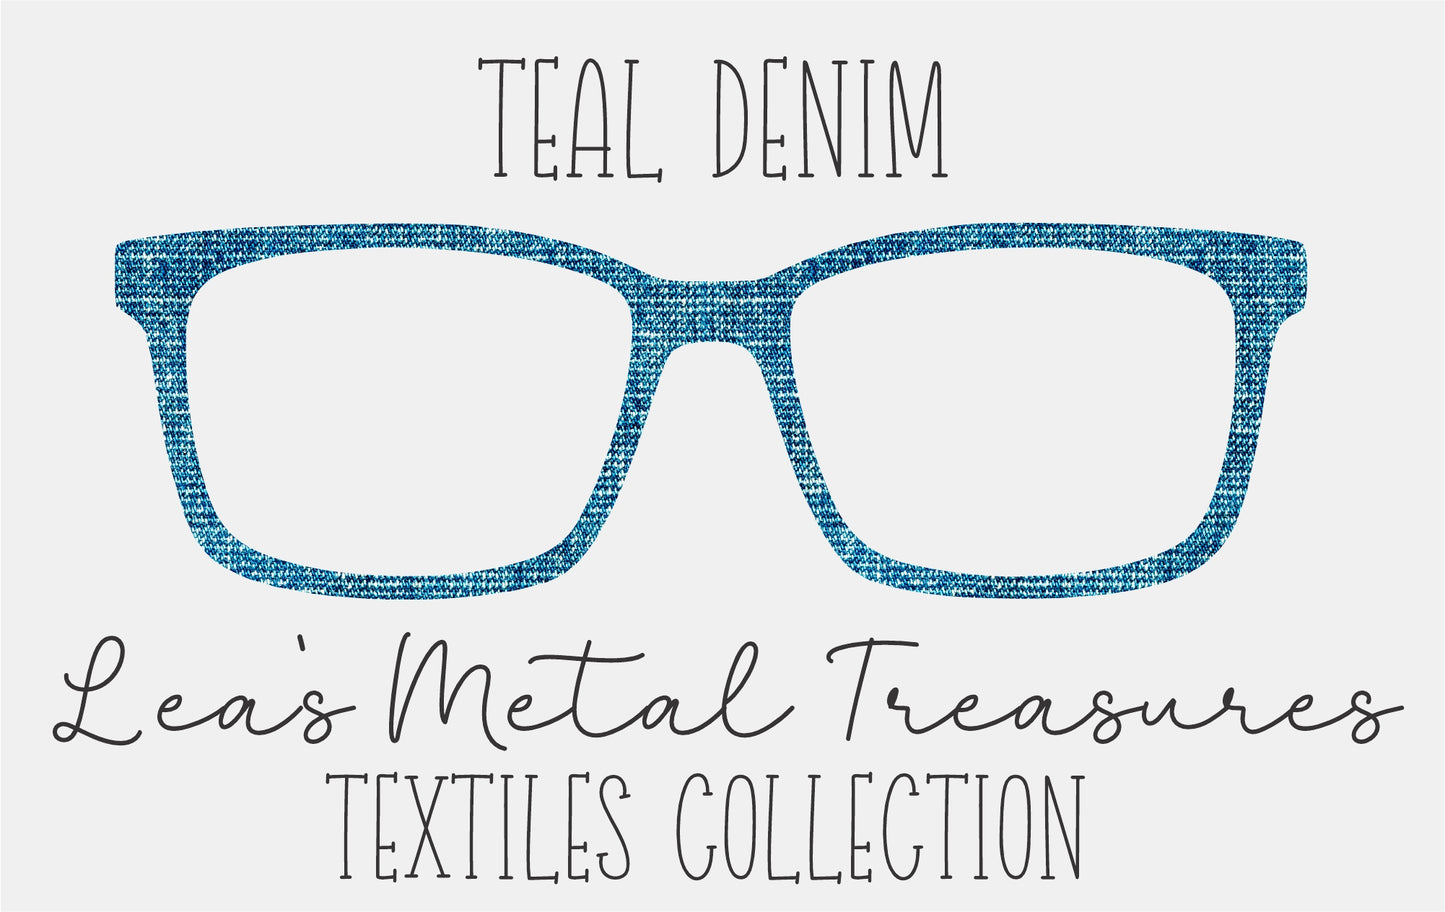 Teal Denim Eyewear Frame Toppers COMES WITH MAGNETS